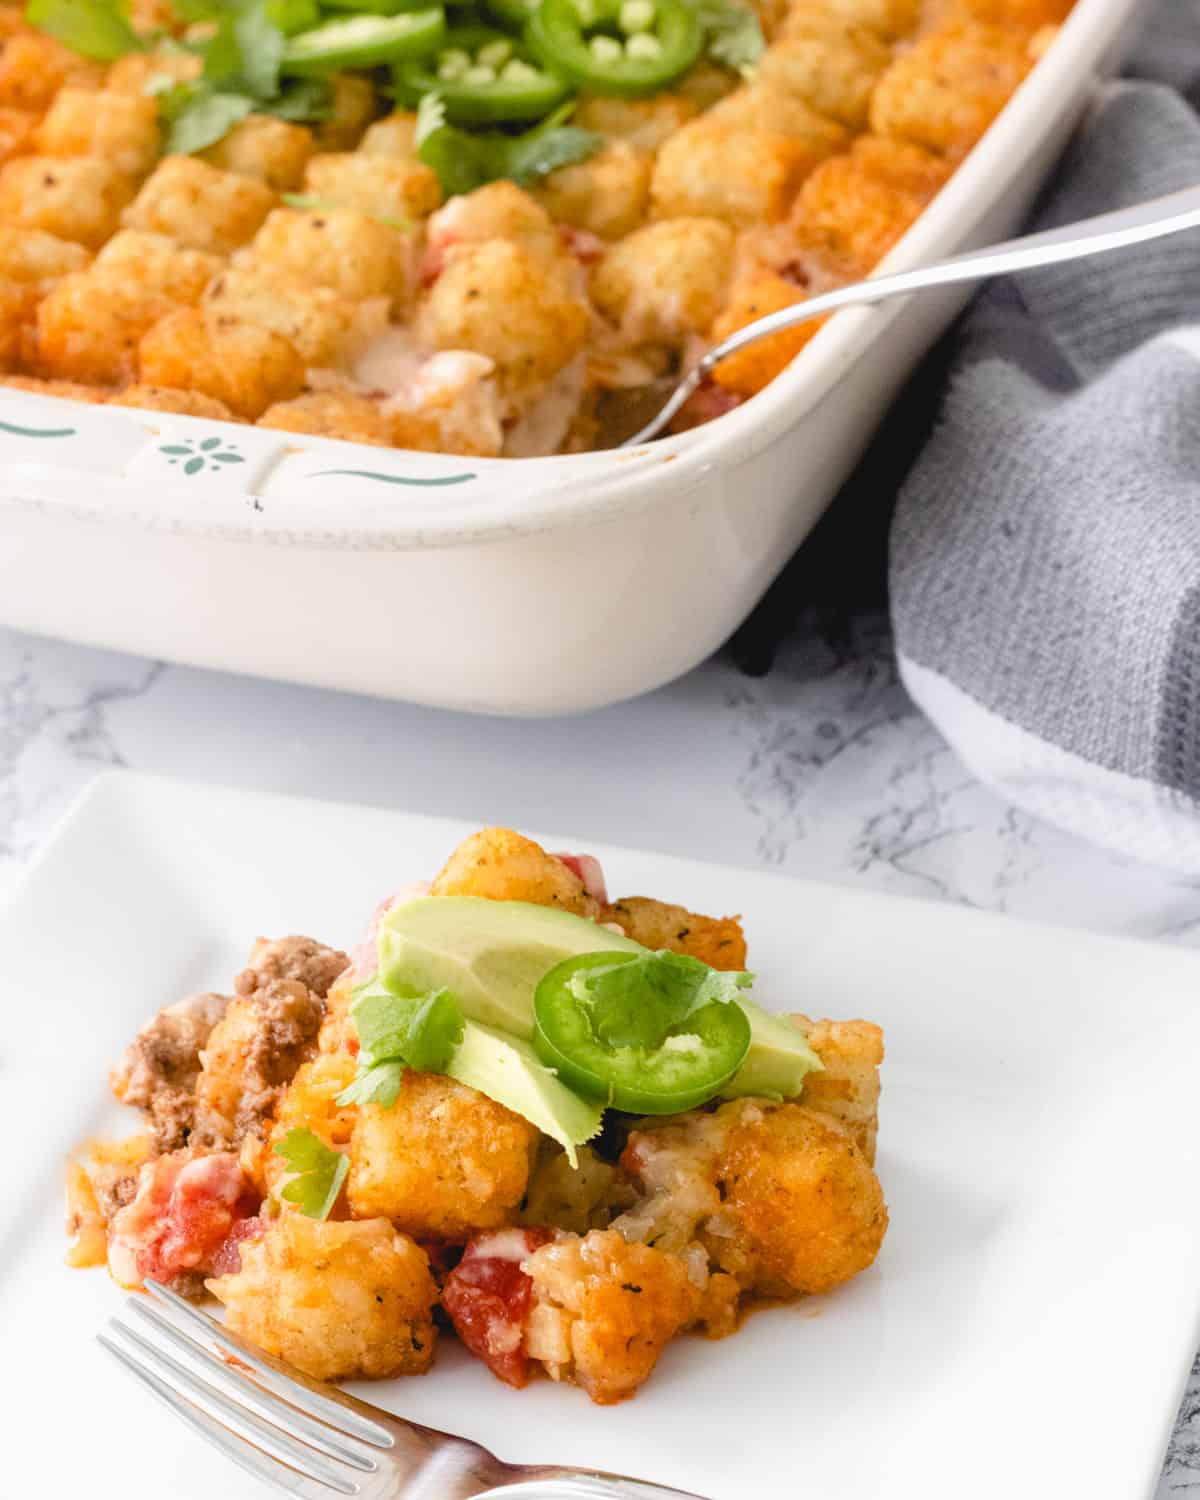 Taco casserole with tater tots, served on a plate with avocado, jalapeno, and cilantro.